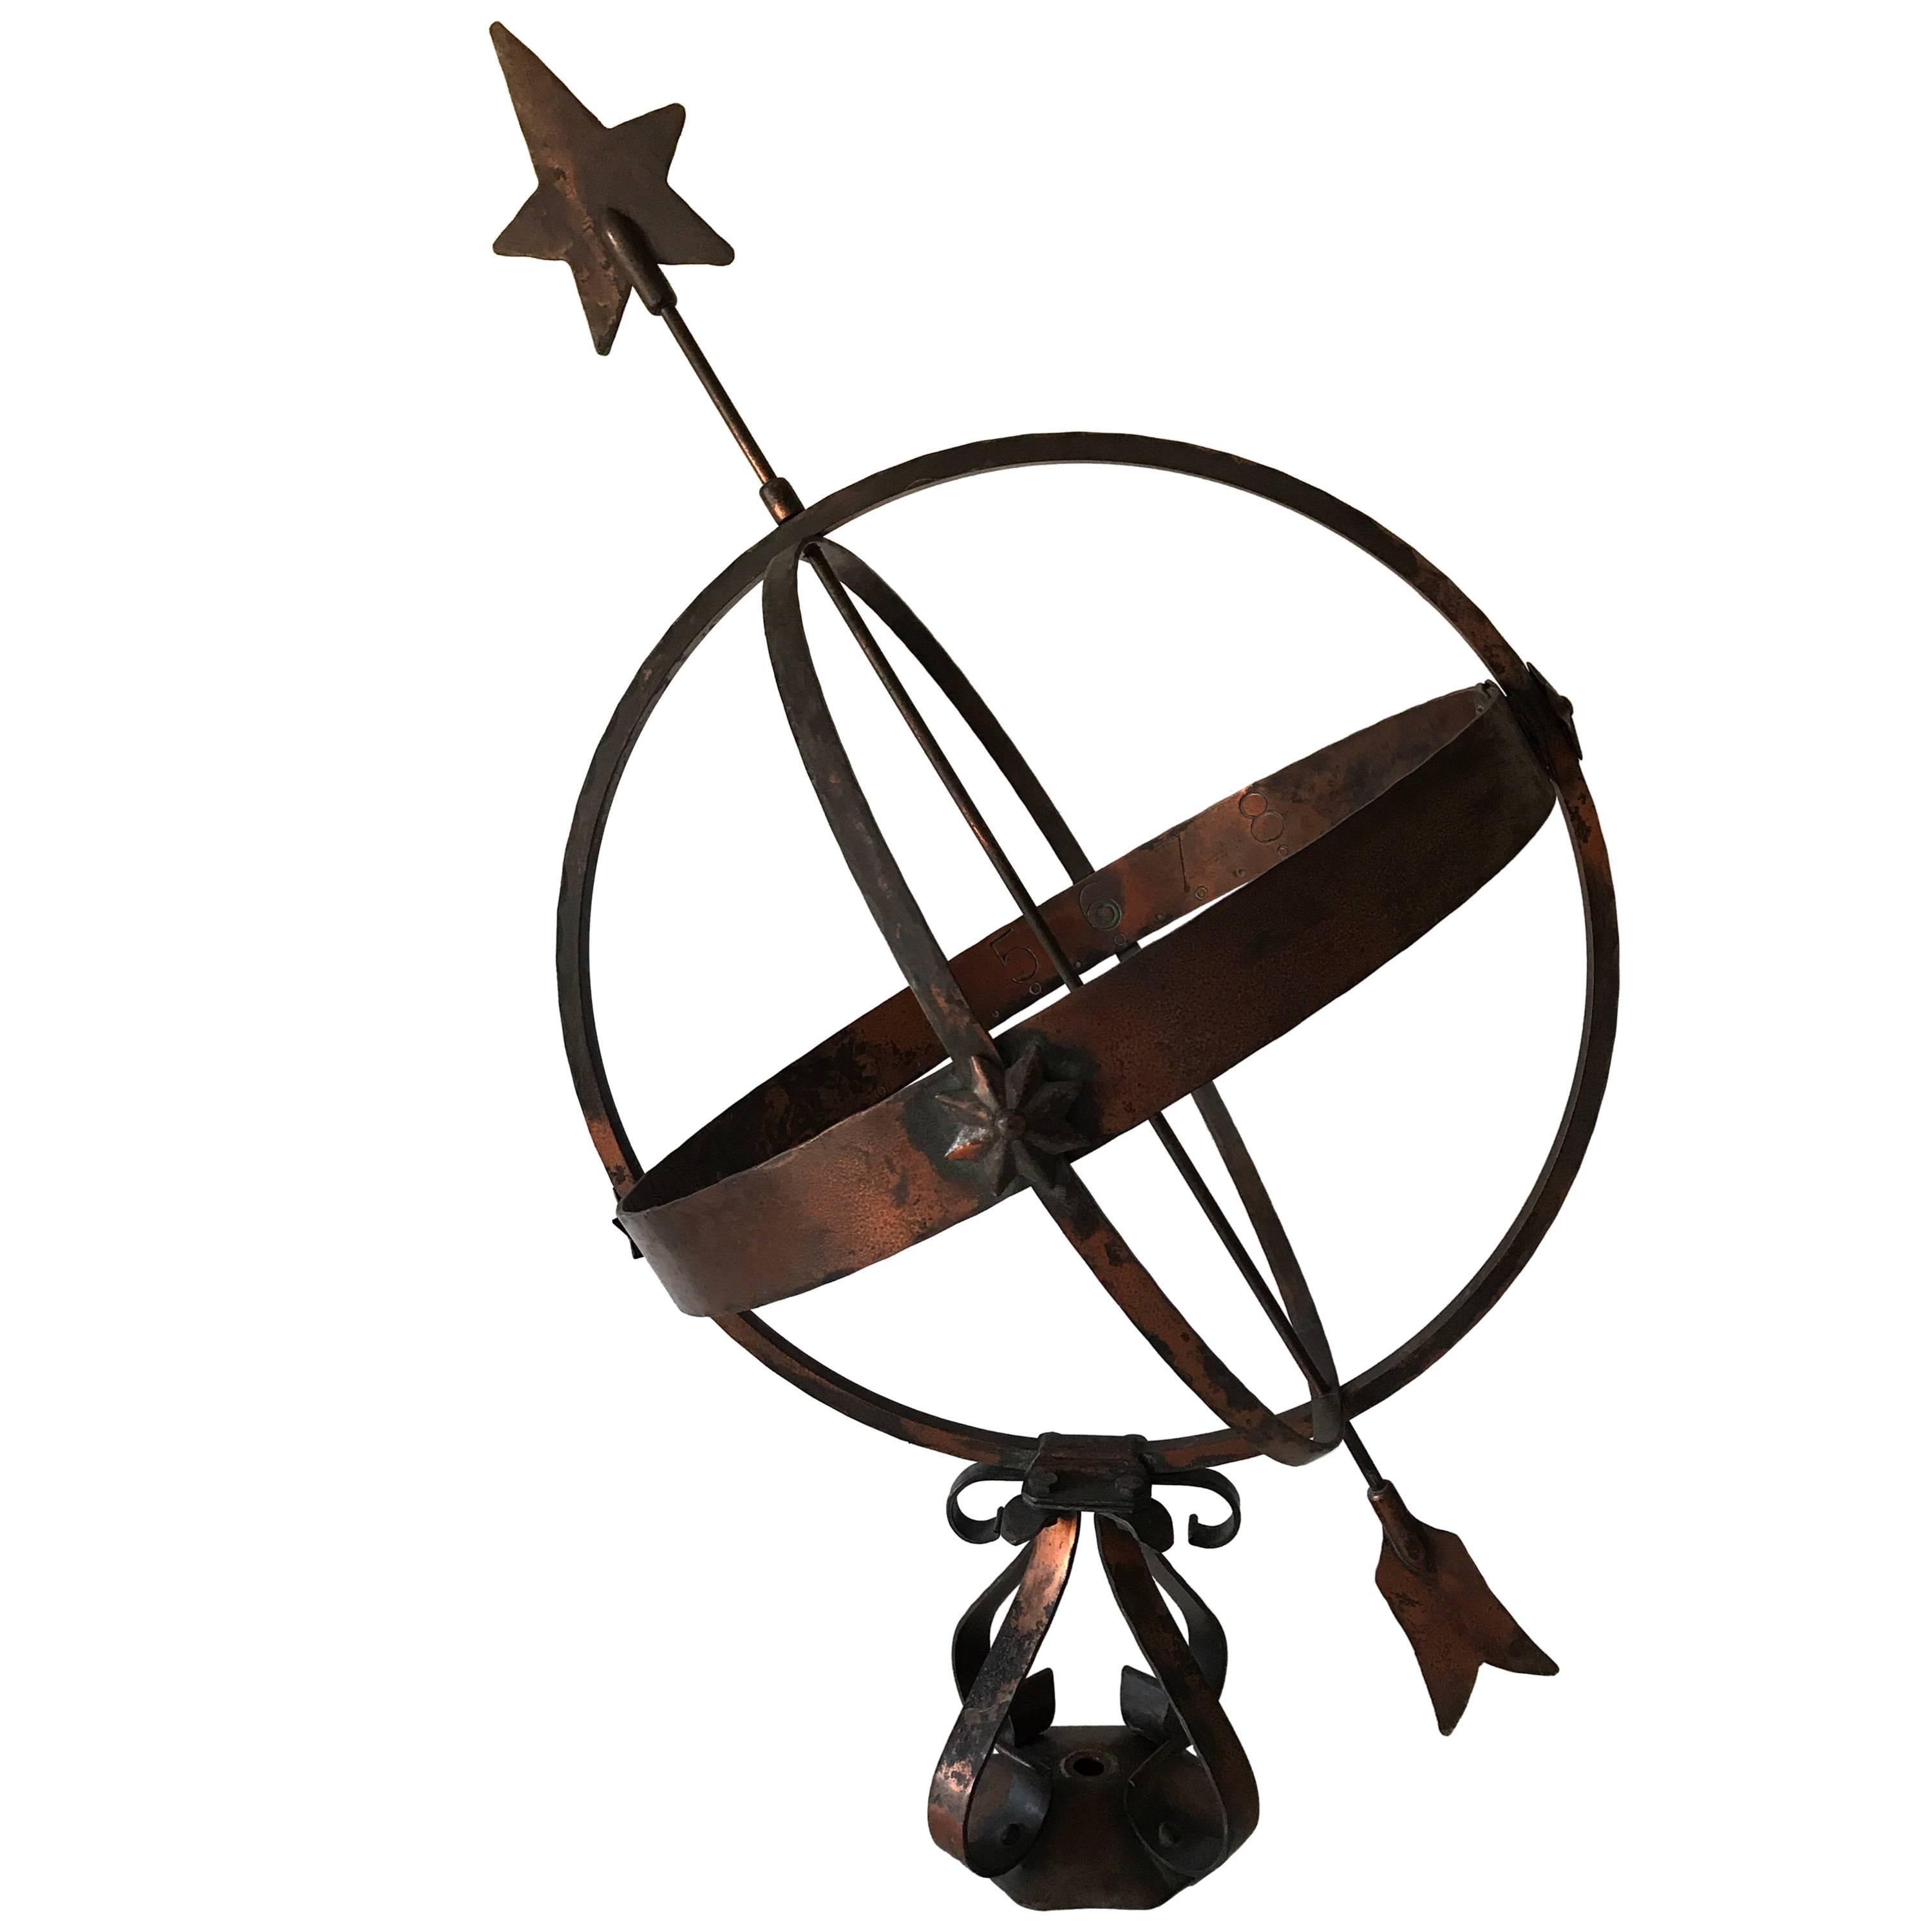 Large Swedish Mid-20th Century Garden Copper Sundial For Sale